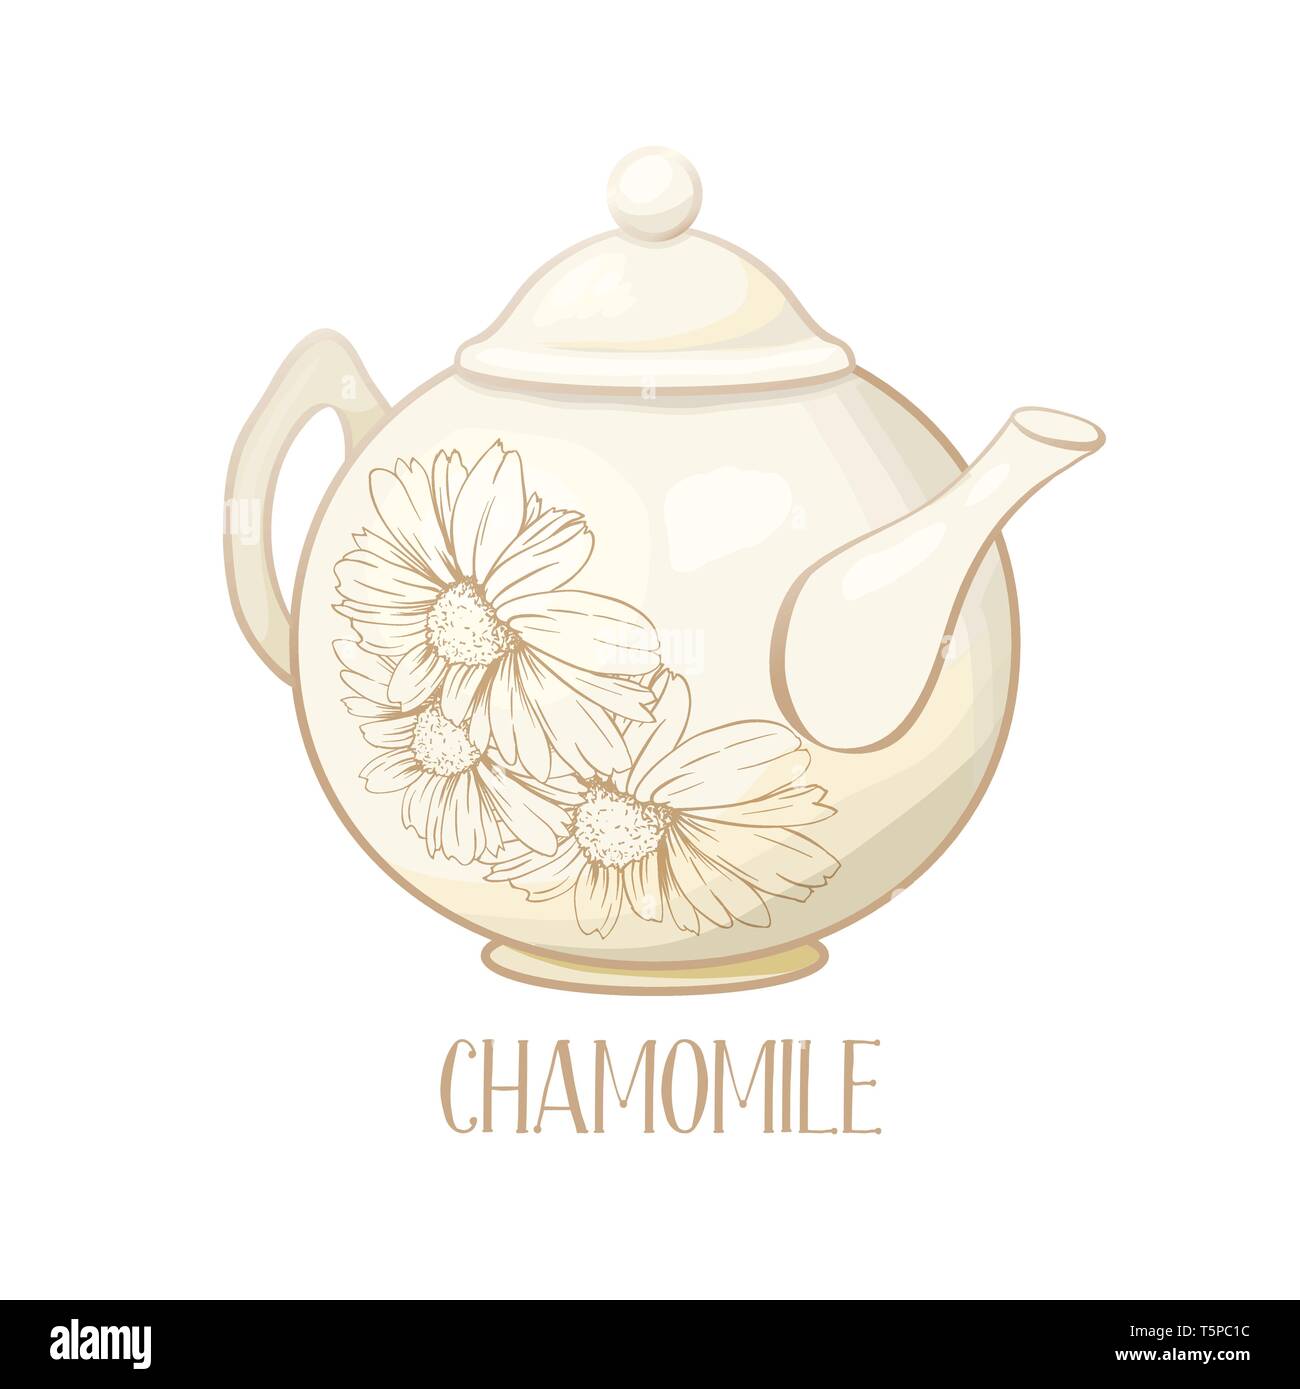 Porcelain or Ceramic Teapot Service. Mint Tea Leaves and Chamomile Flowers. Green Tea Cup. Isolated and Detailed Herbal Therapy Vector Illustration. Banner Design, Restaurant Menu, English Breakfast. Stock Vector